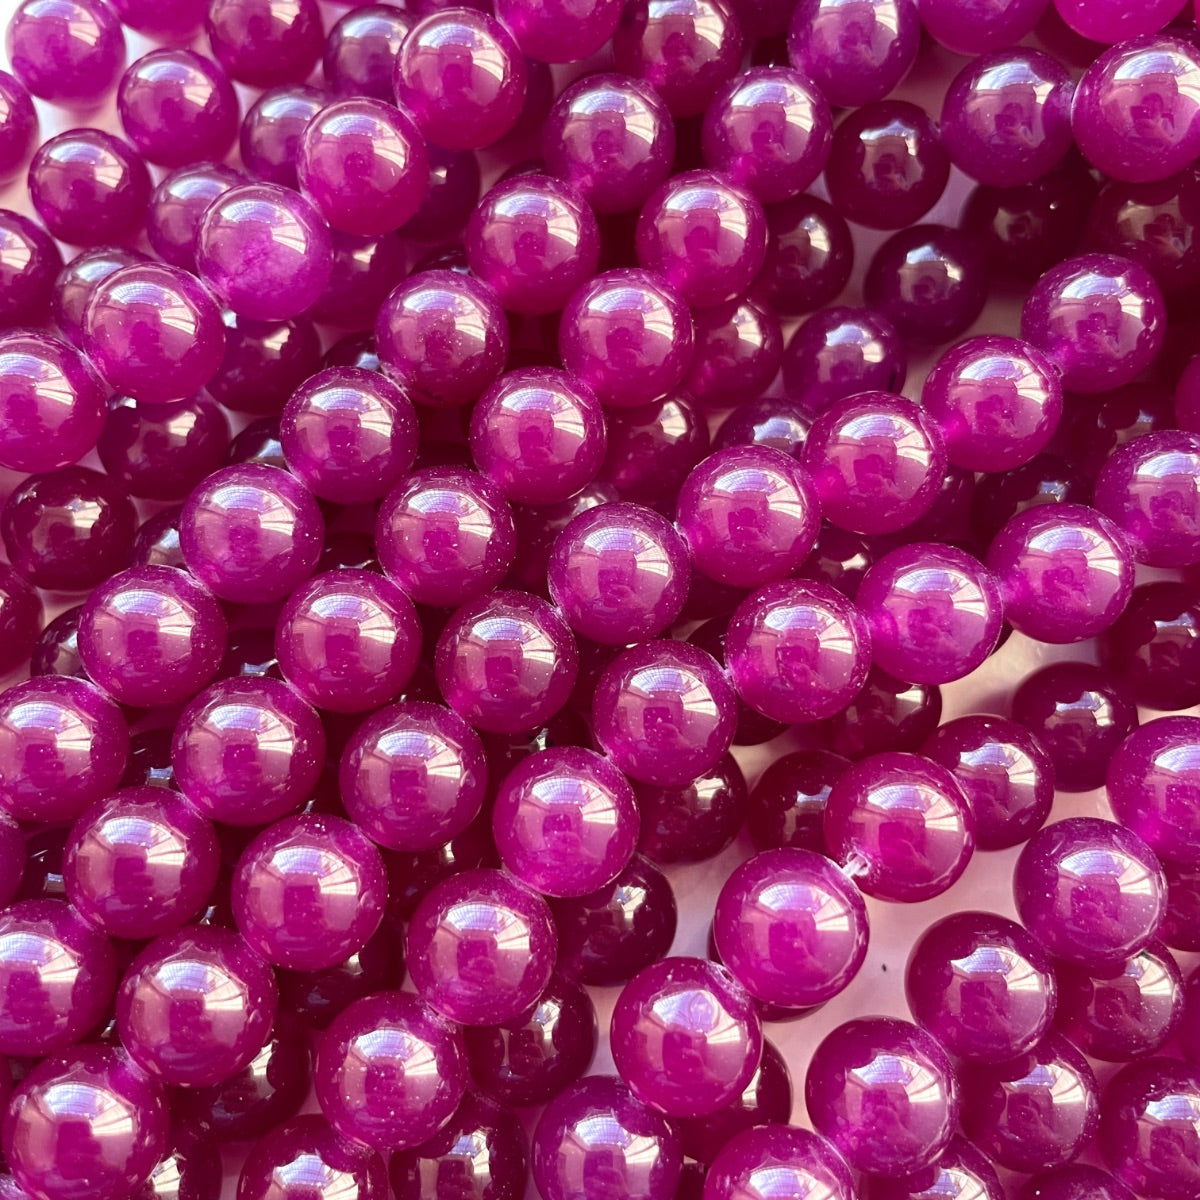 2 Strands/lot 10mm Colorful Candy Color Jade Stone Round Beads Purple Stone Beads New Beads Arrivals Round Jade Beads Charms Beads Beyond